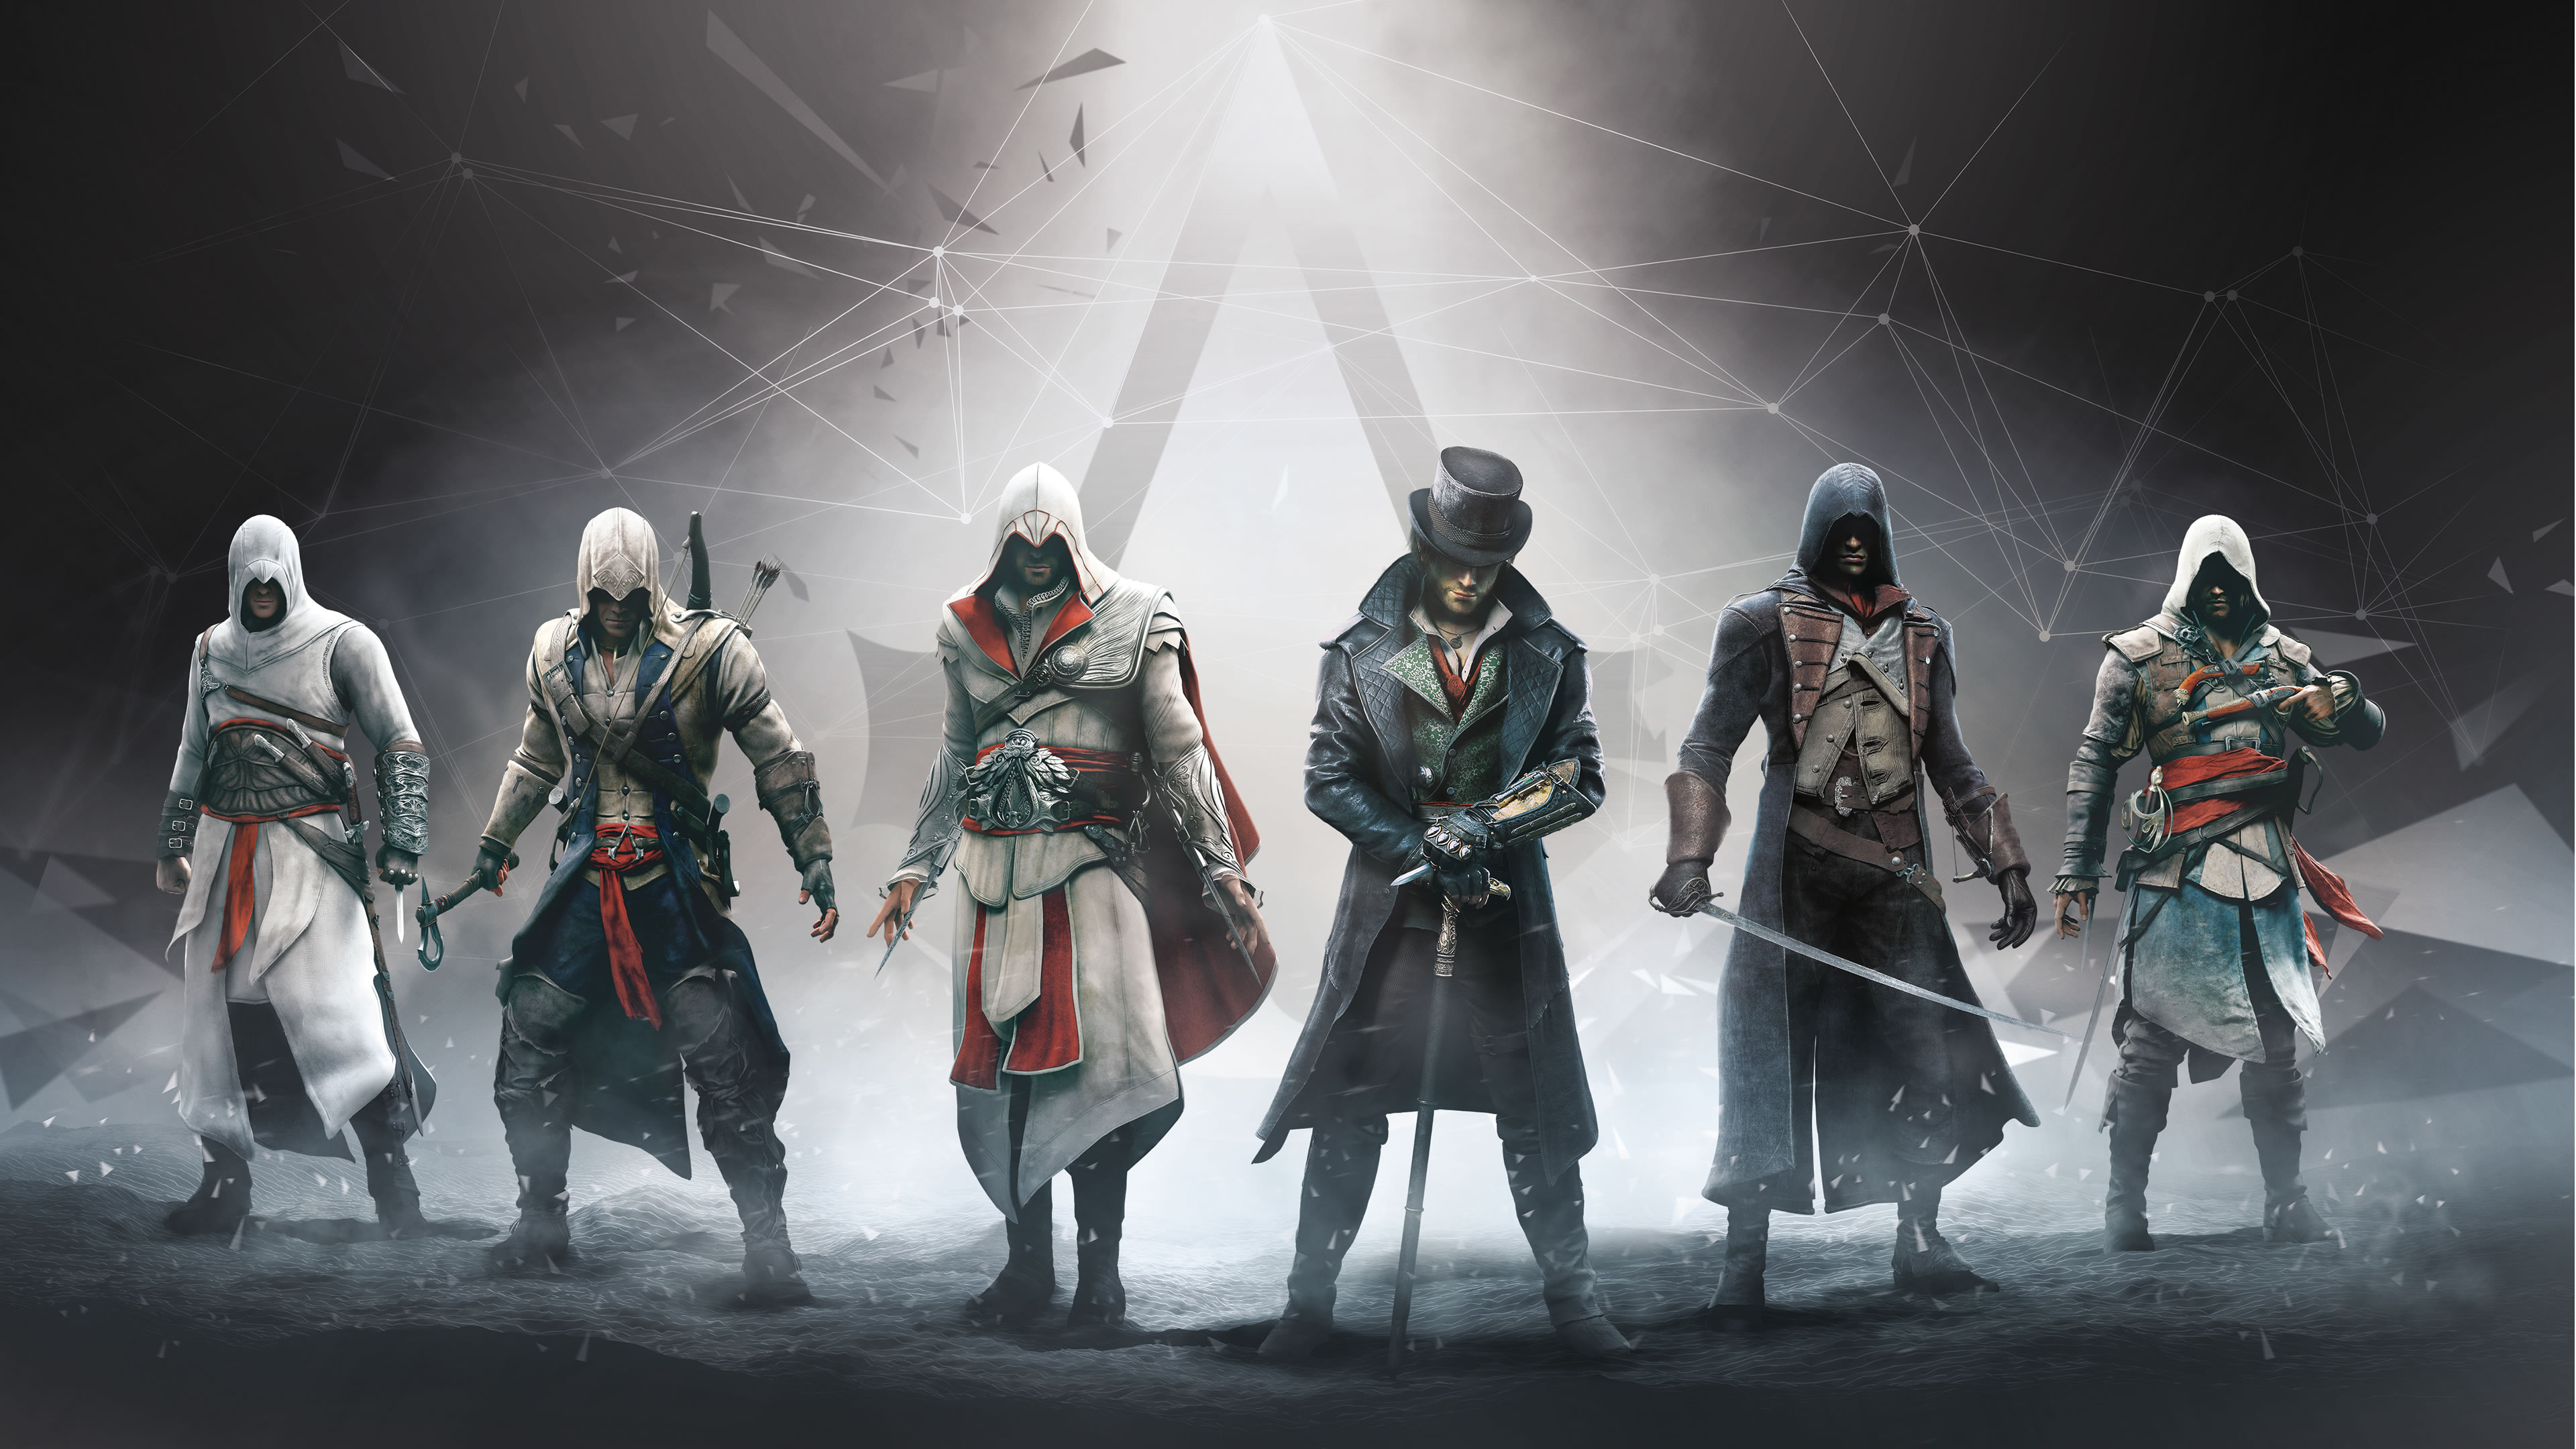 Assassins Creed Syndicate Amazing Wallpapers